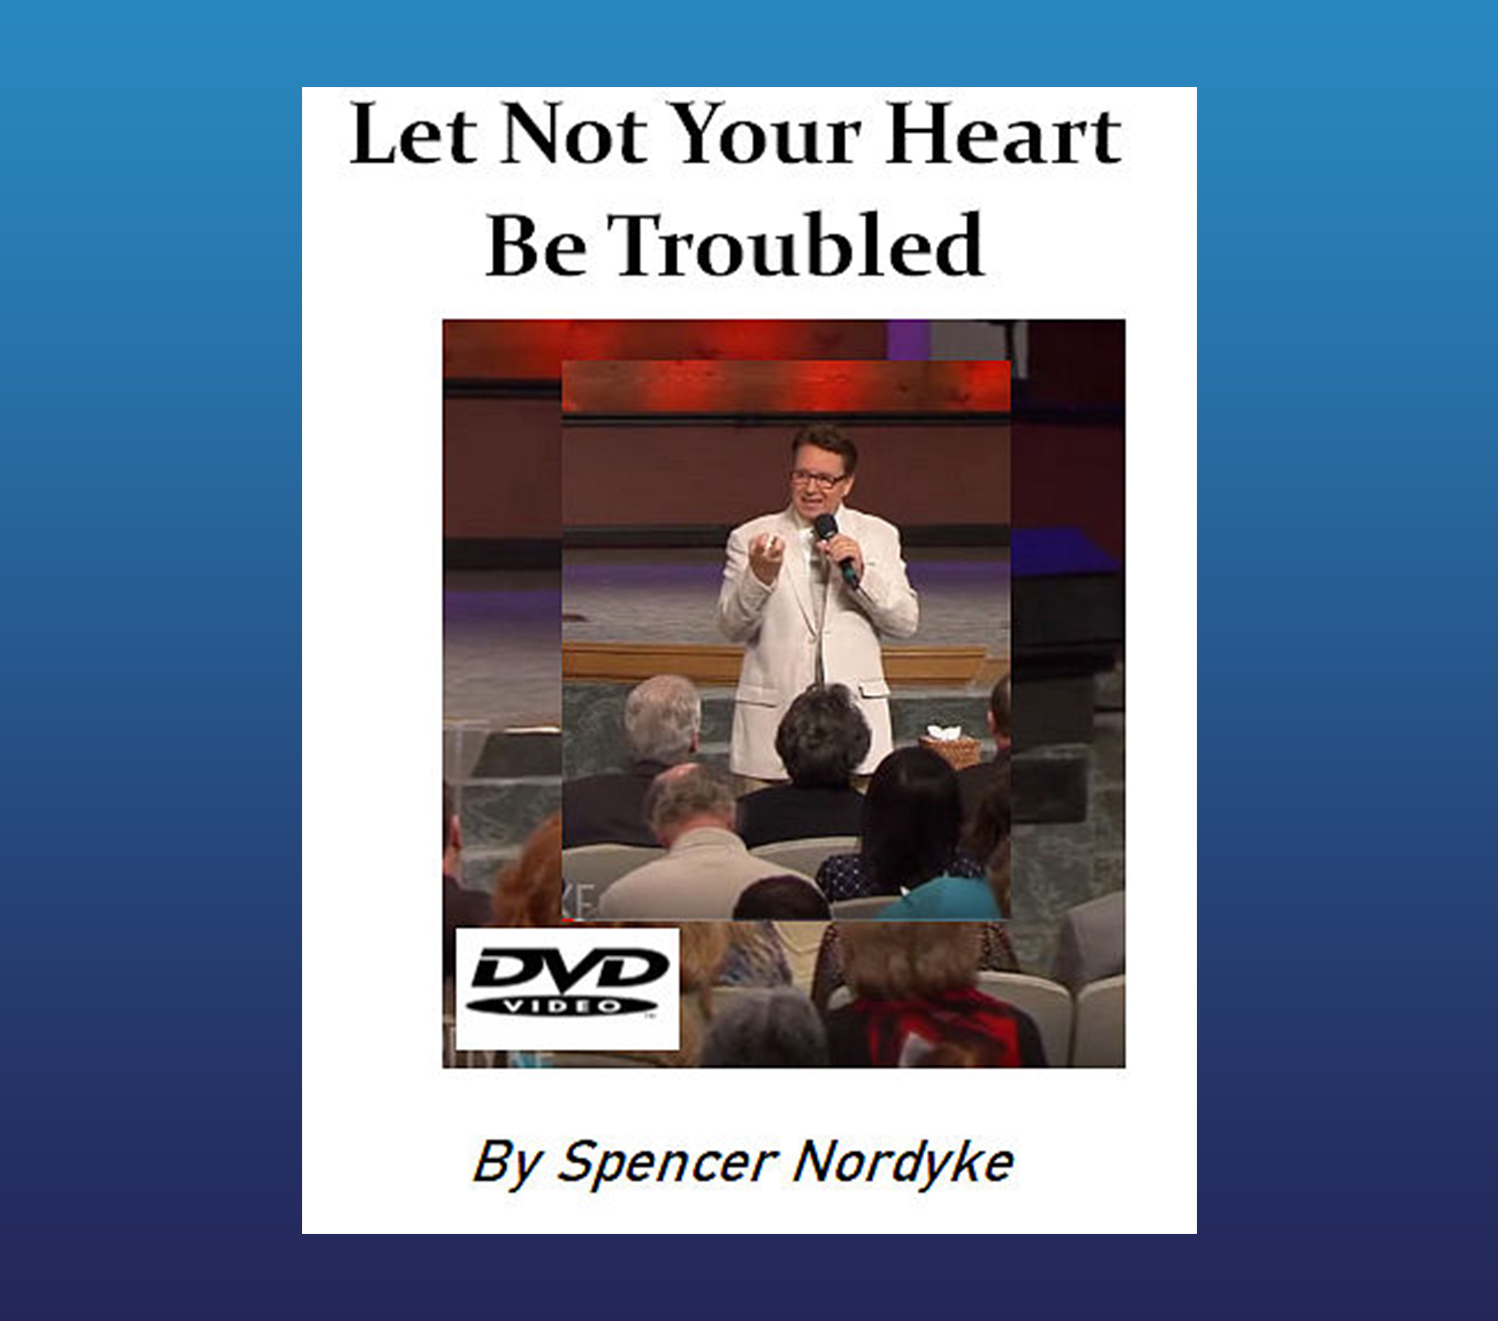 Let Not Your Heart Be Troubled  DVD